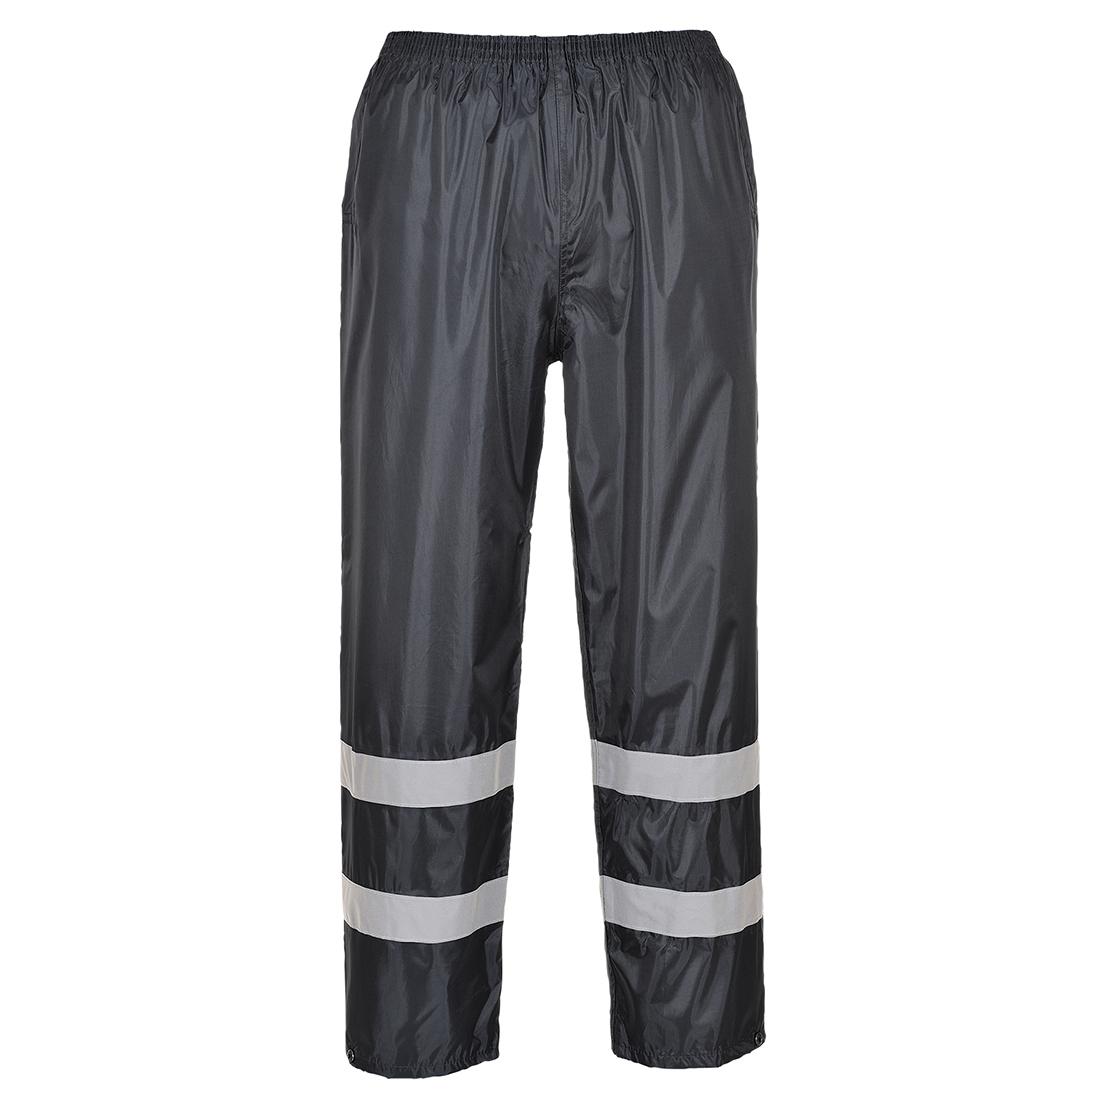 Portwest Classic Iona Rain Jacket & Trouser - Safetyware Sdn Bhd